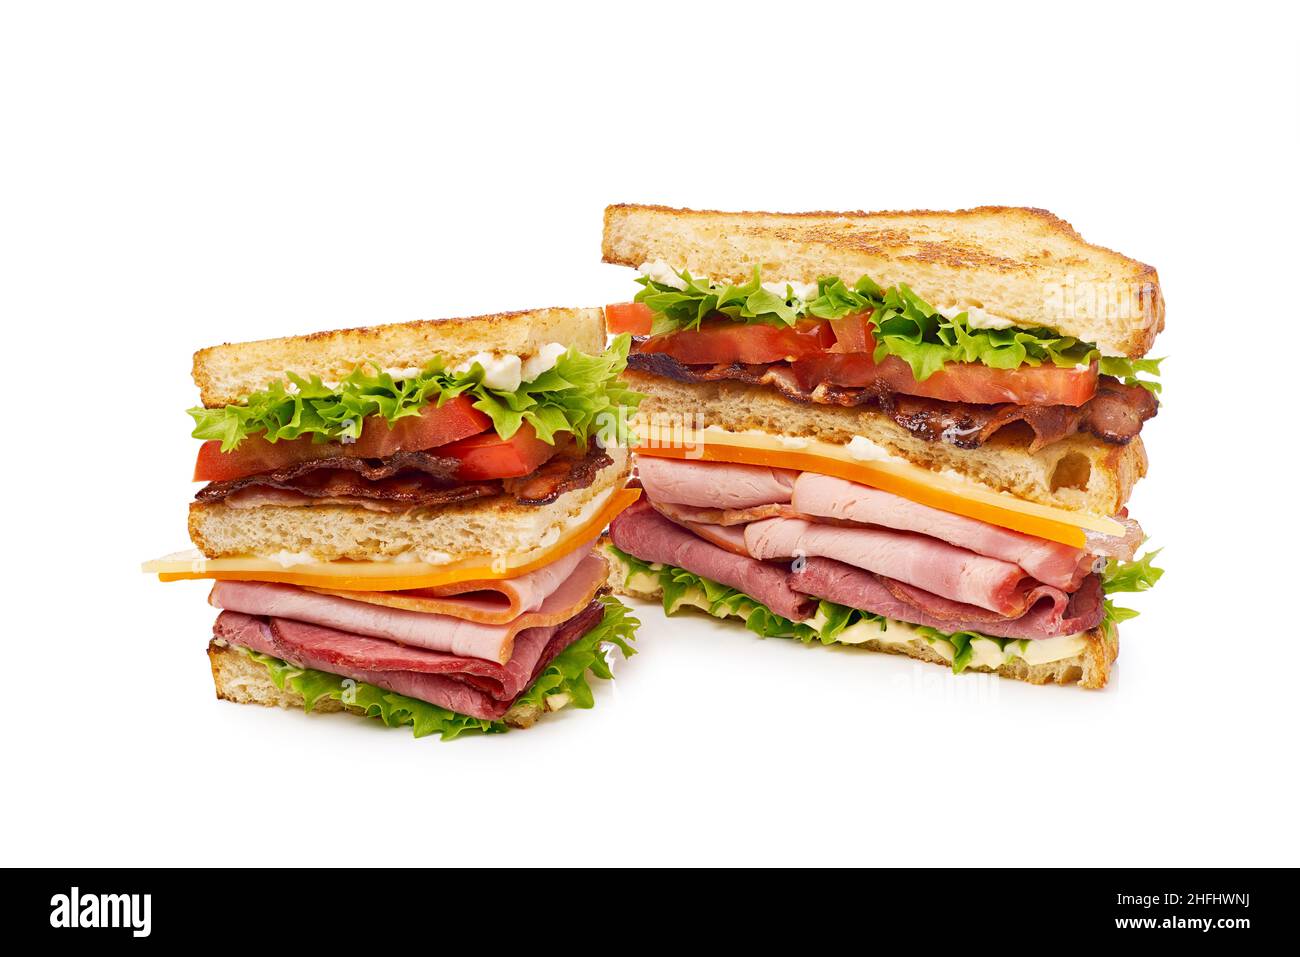 Two pieces of club sandwich on white Stock Photo